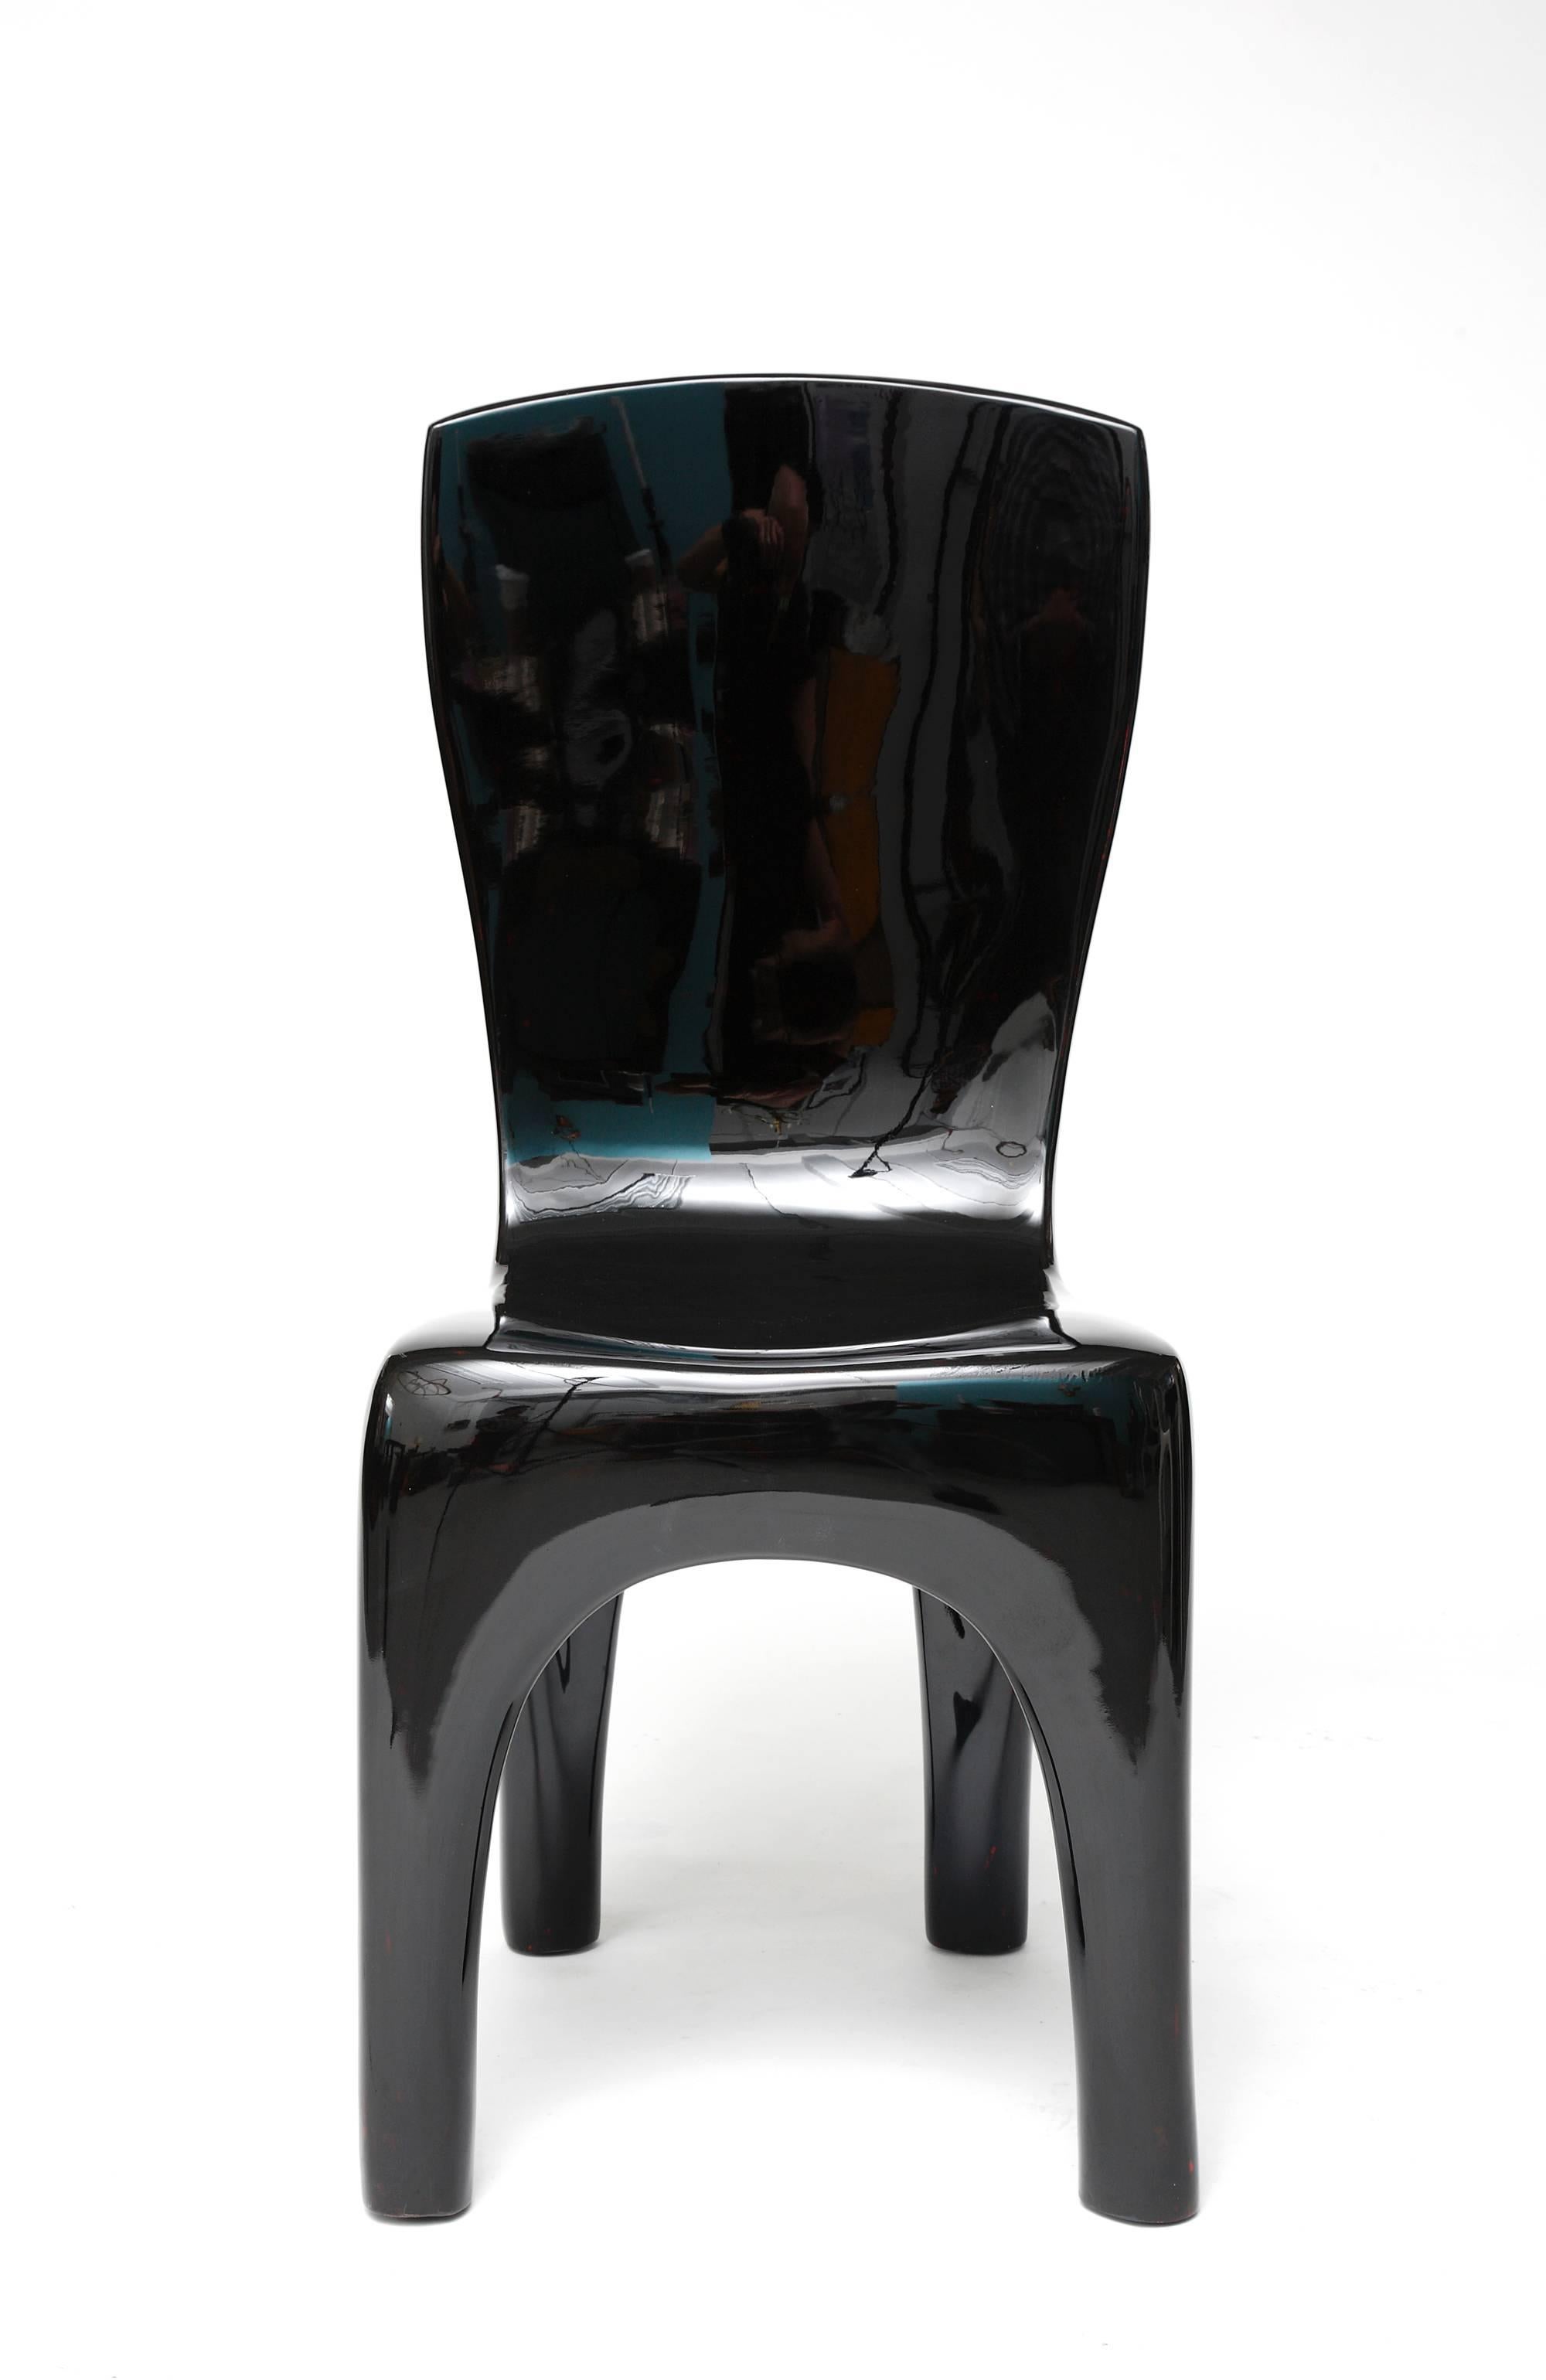 Lacquered Sculpted Dining Chairs in Black Lacquer by Jacques Jarrige, 2015